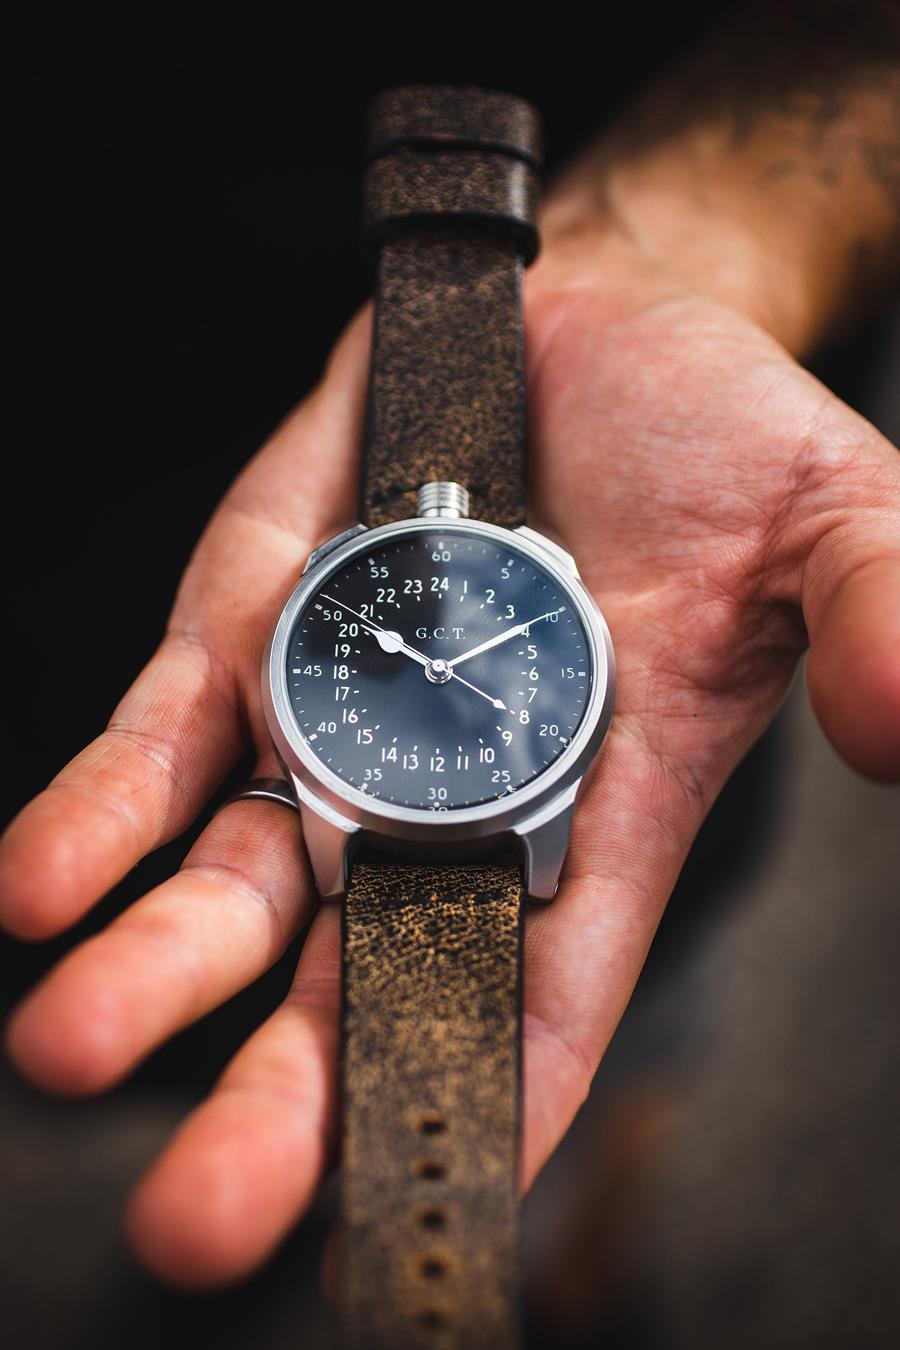 Close up of a watch being held in a hand. Stainless steel case, dark brown leather strap. 